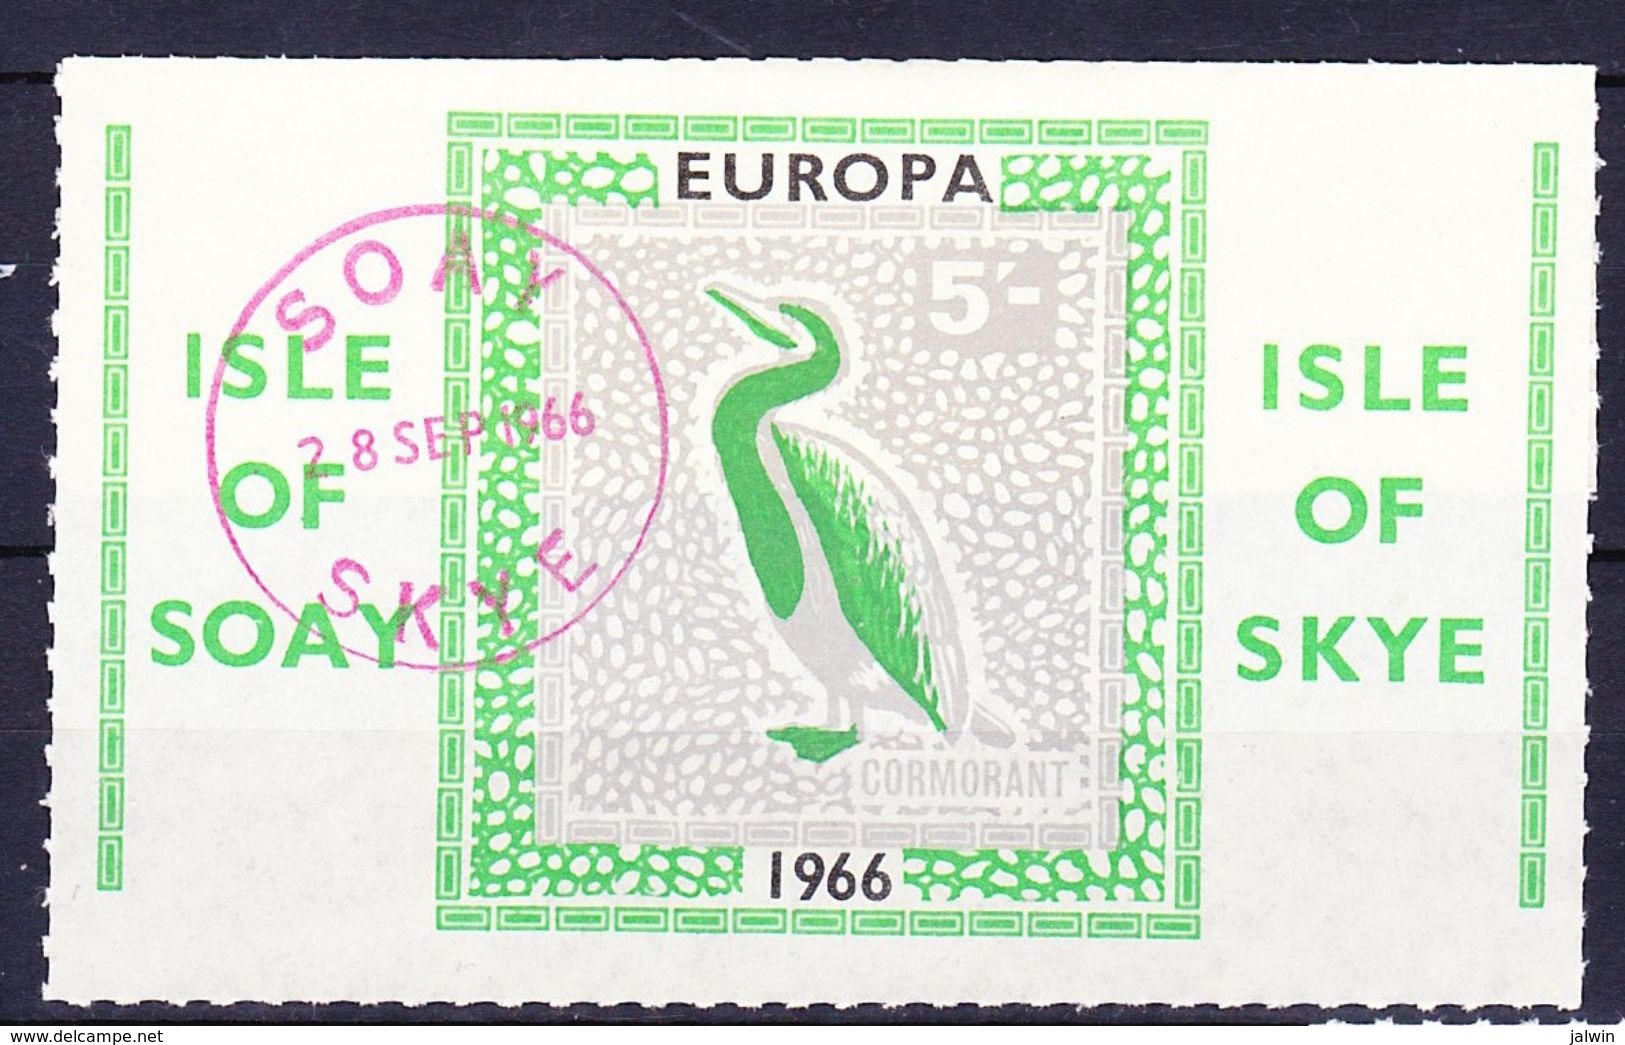 ISLE OF SOAY (Emission Locale) - 1966 EUROPA SERIE (+ BLOC ET BLOC LUXE) Obl. Birds / Oiseaux - Local Issues